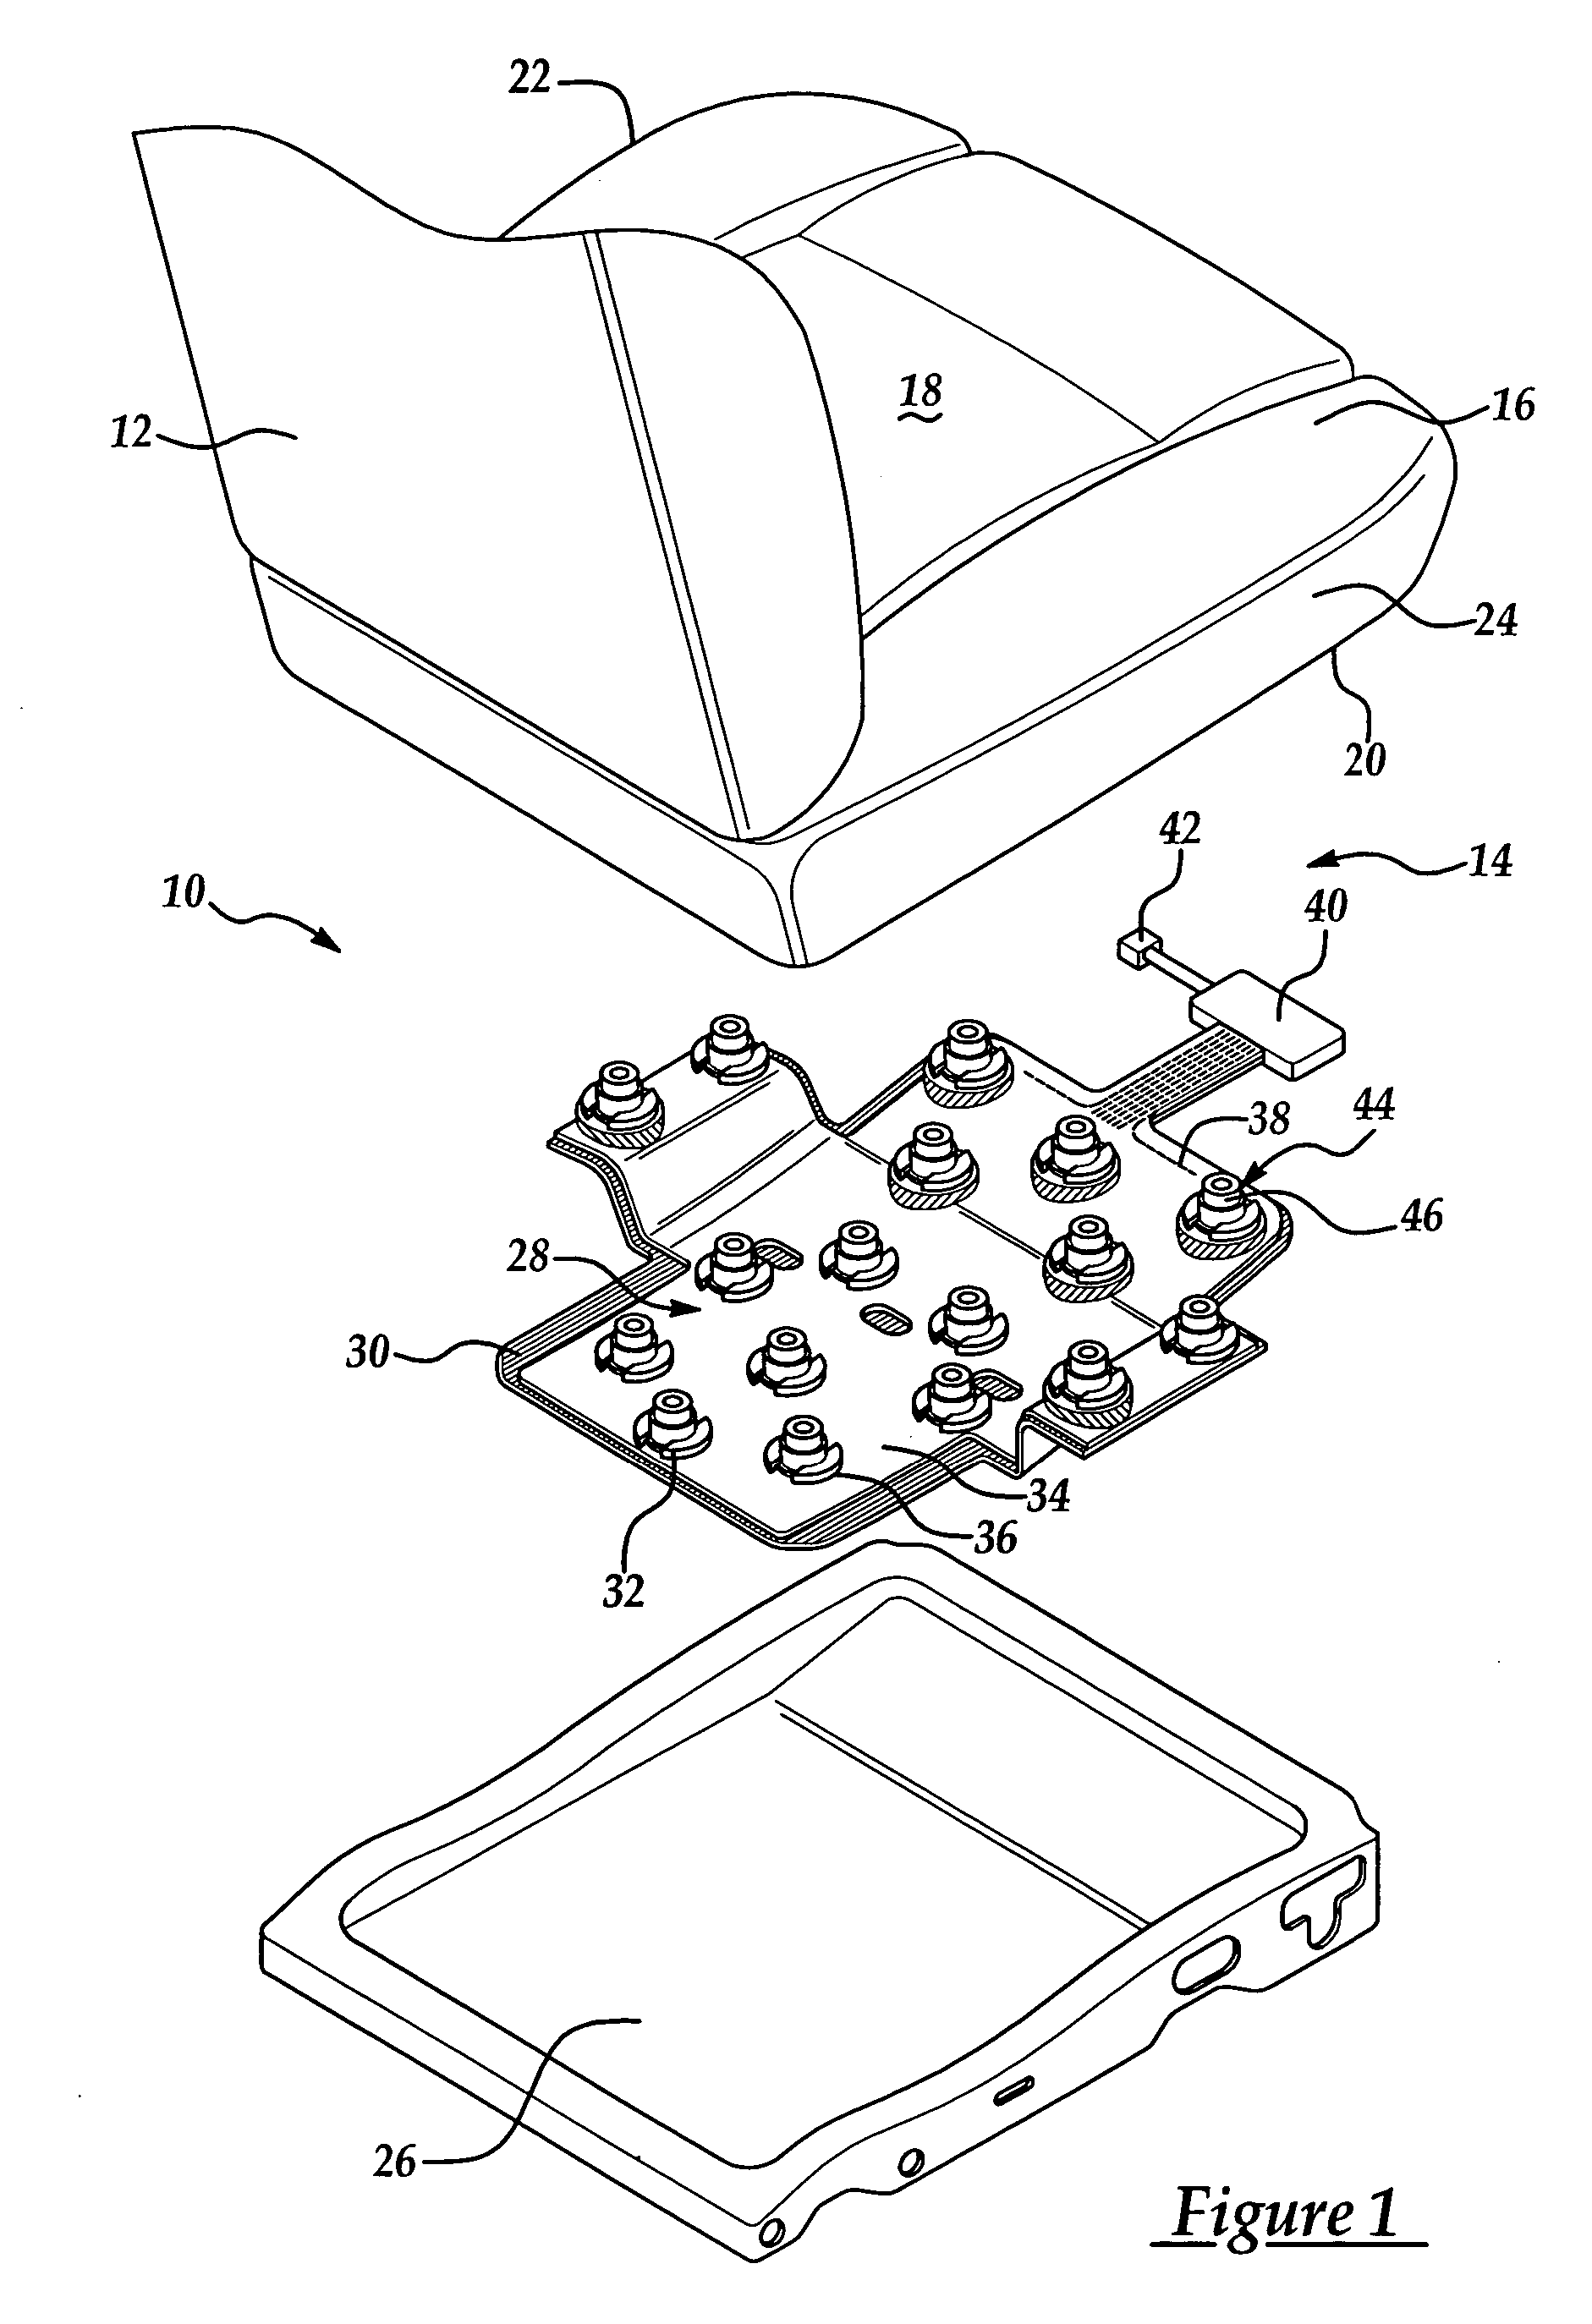 Vehicle occupant sensing system having an upper slide member with an emitter interference member